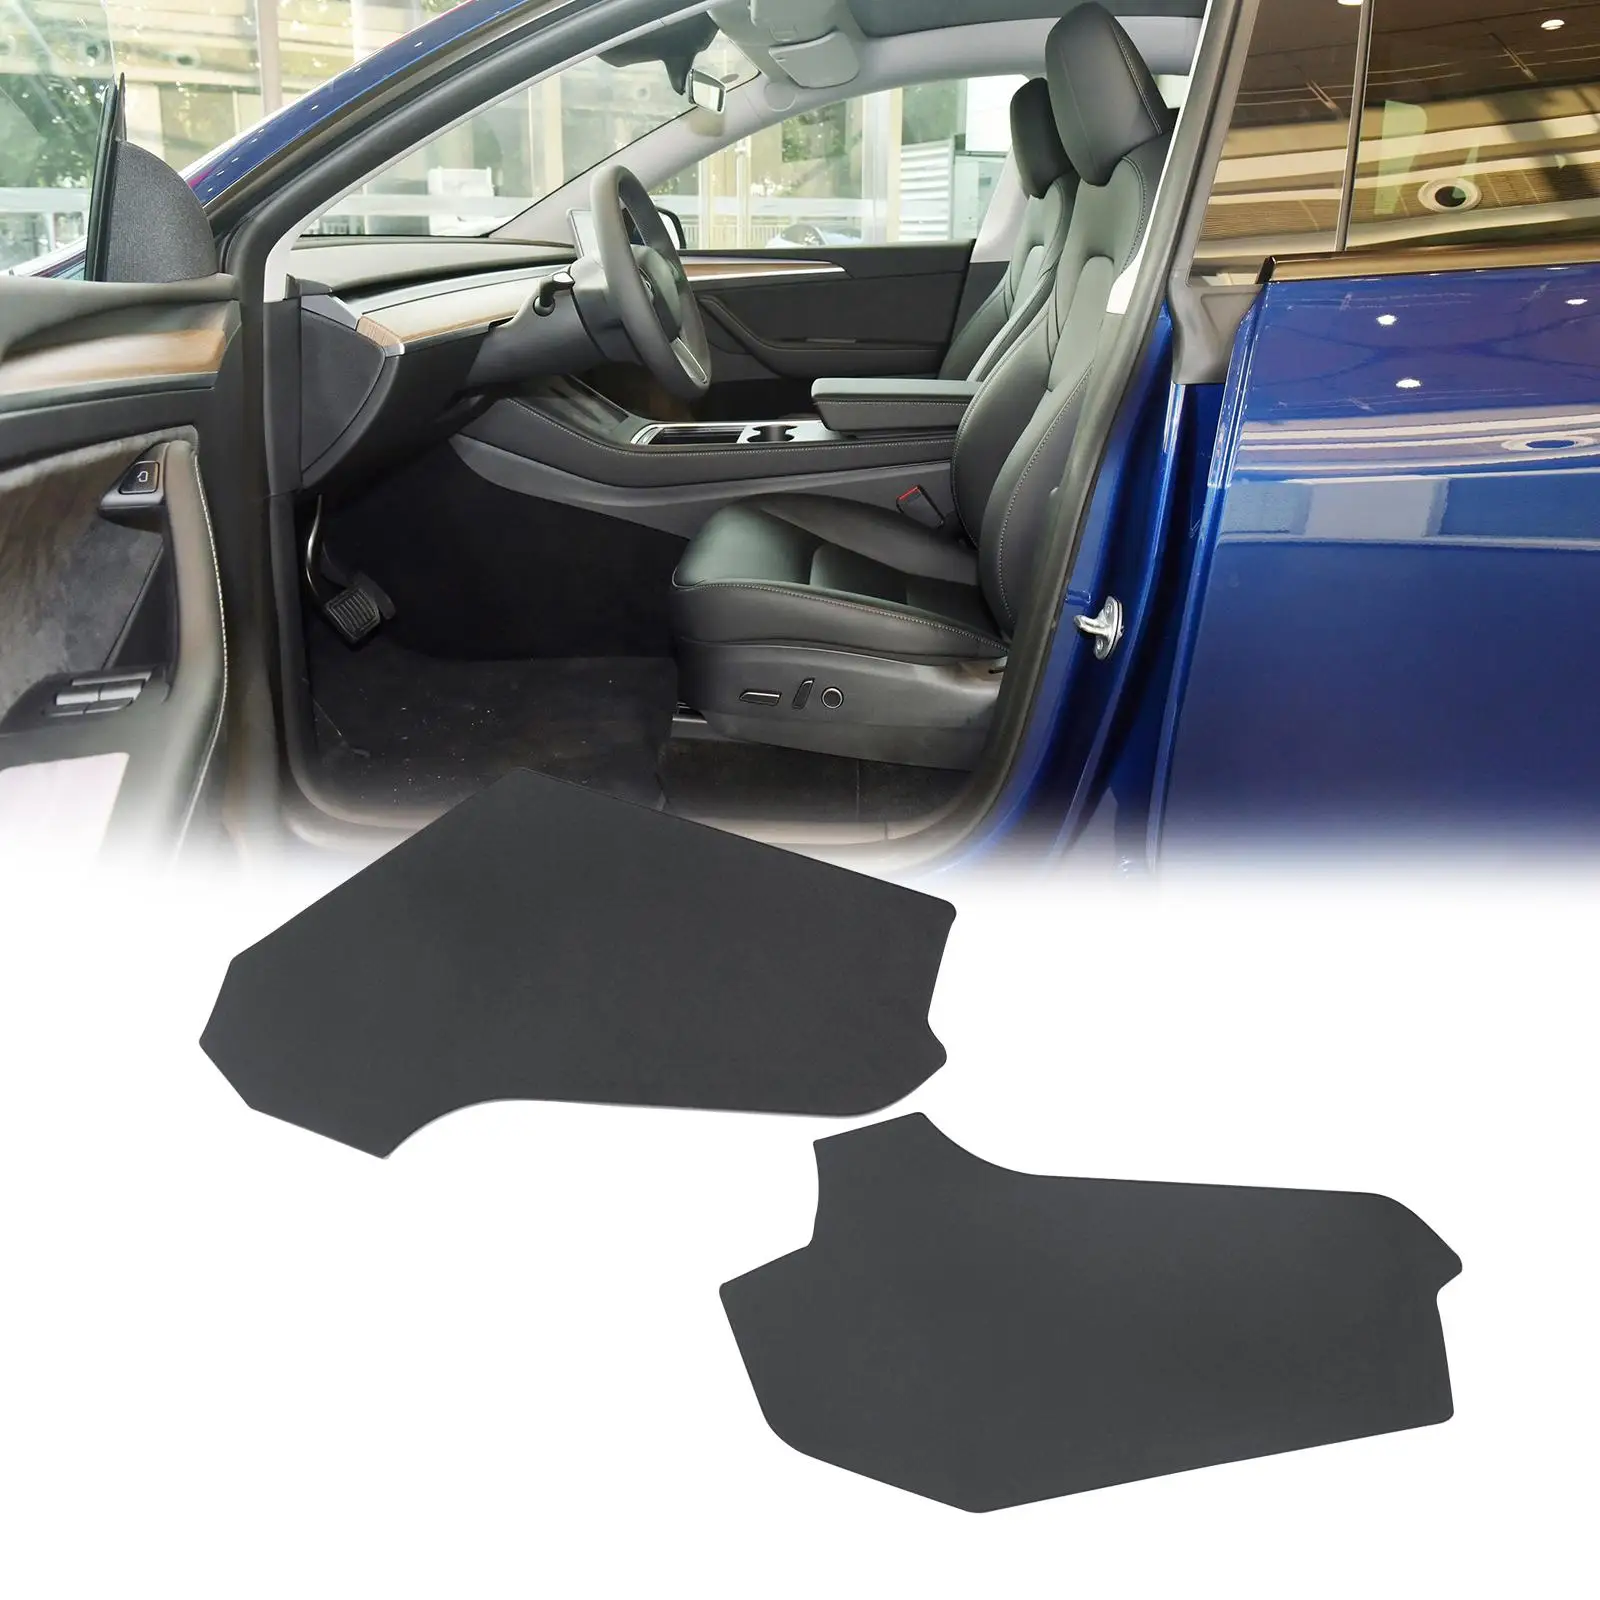 2 Pieces Center Console Side Anti Kick Mat Car Interior Accessories Replacement Dirt Protector Cover Pad for Tesla Model Y